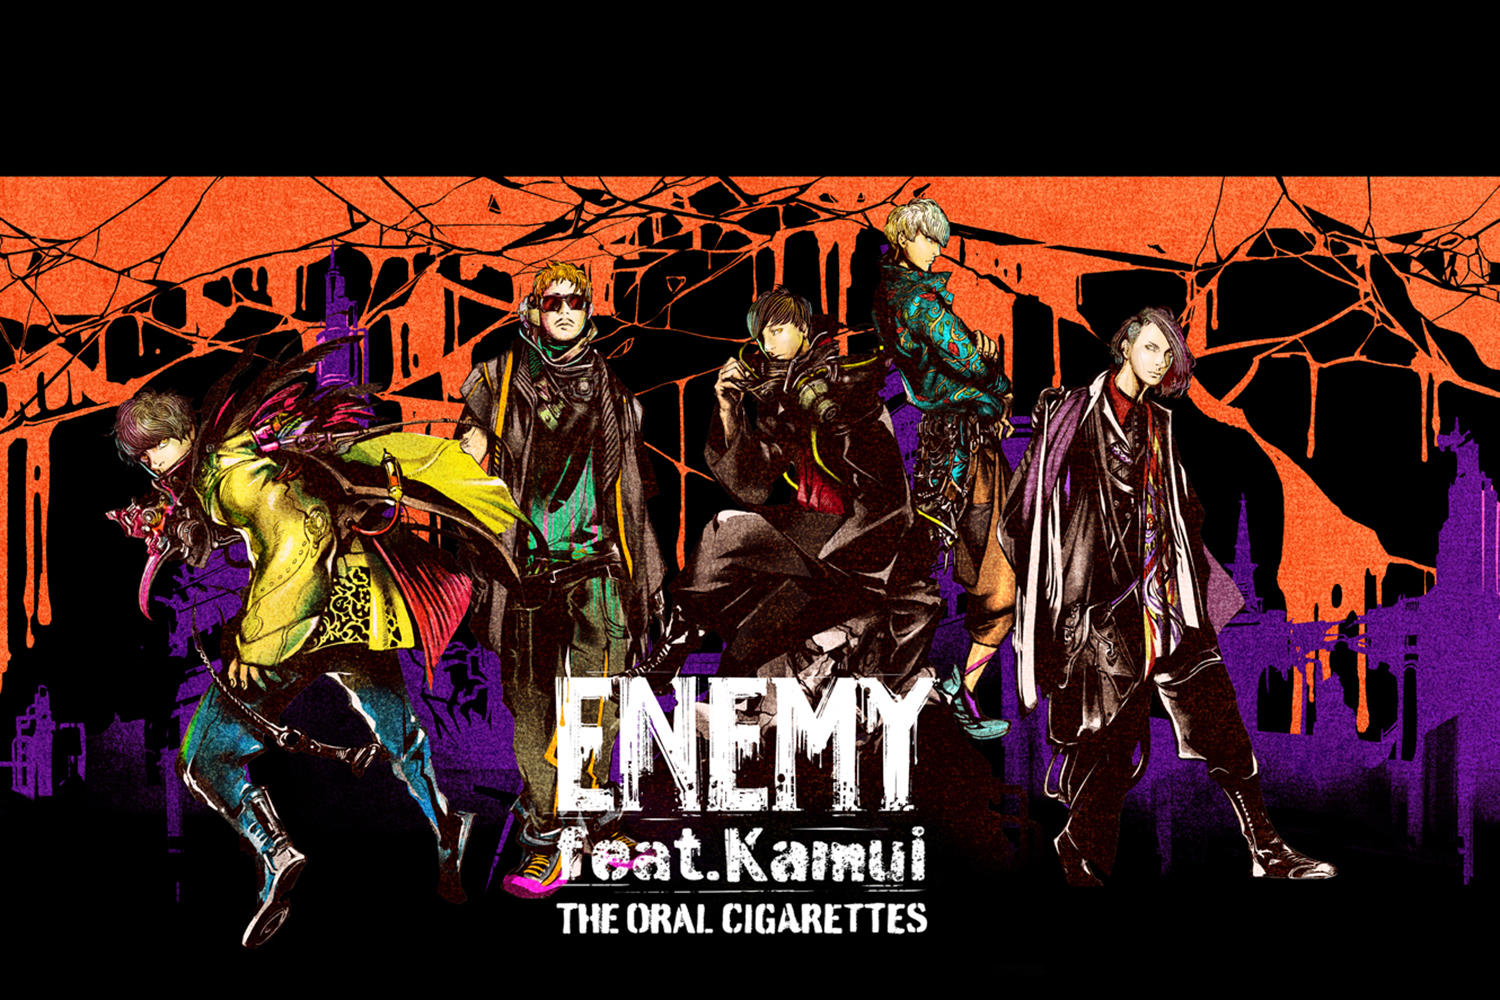 THE ORAL CIGARETTES、開催中のホールツアー東京公演日3/23(水)に新曲「ENEMY feat.Kamui」デジタルリリース！